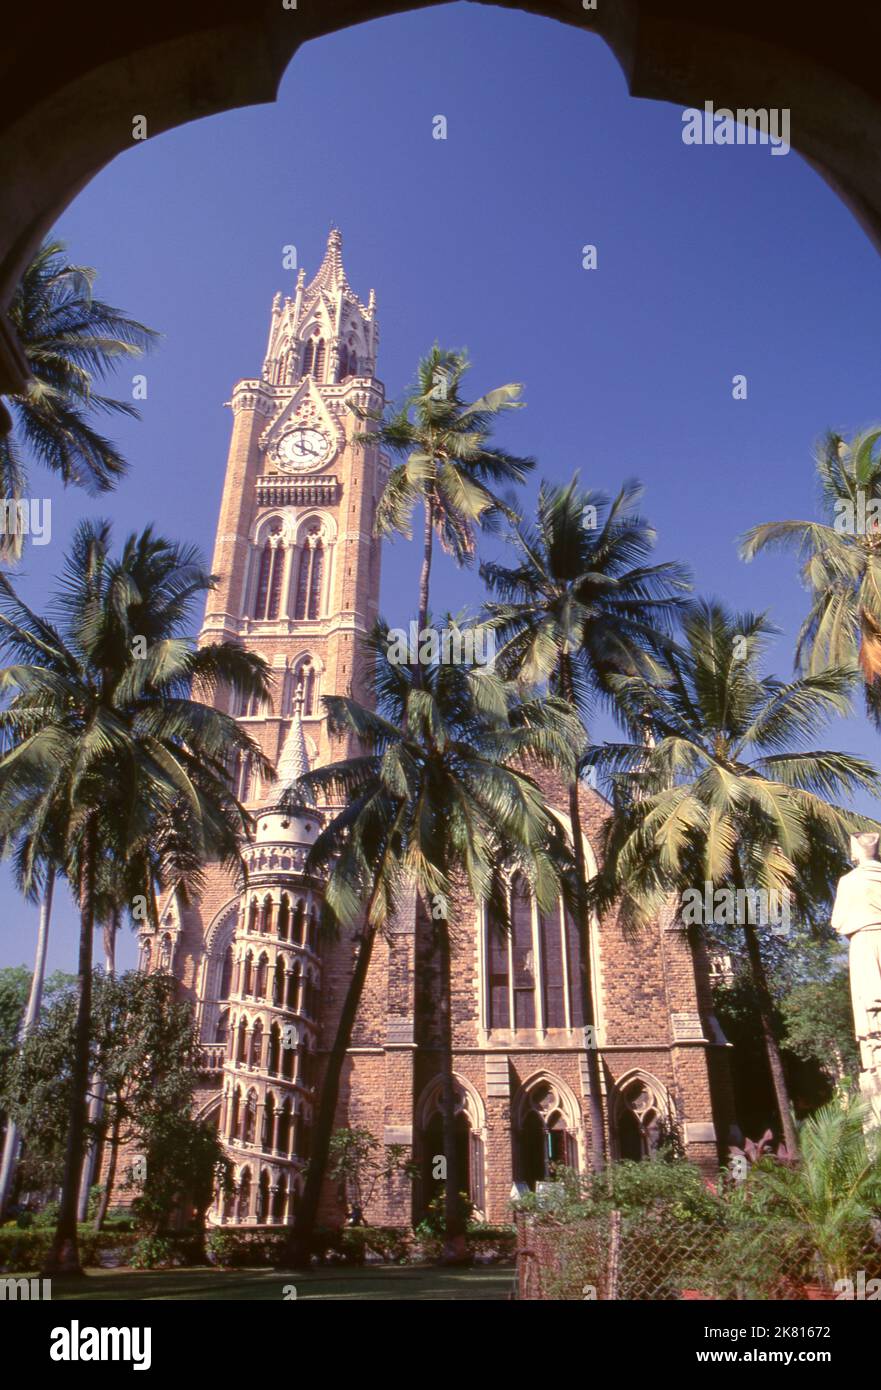 India: The Rajabai Clock Tower and the university library, University of Mumbai, Fort campus, Mumbai, built in so-called‚ Bombay Gothic style. The University of Bombay, as it was originally known, was established in 1857. The Rajabai Tower and library building were designed by Sir George Gilbert Scott and completed in 1878. Stock Photo